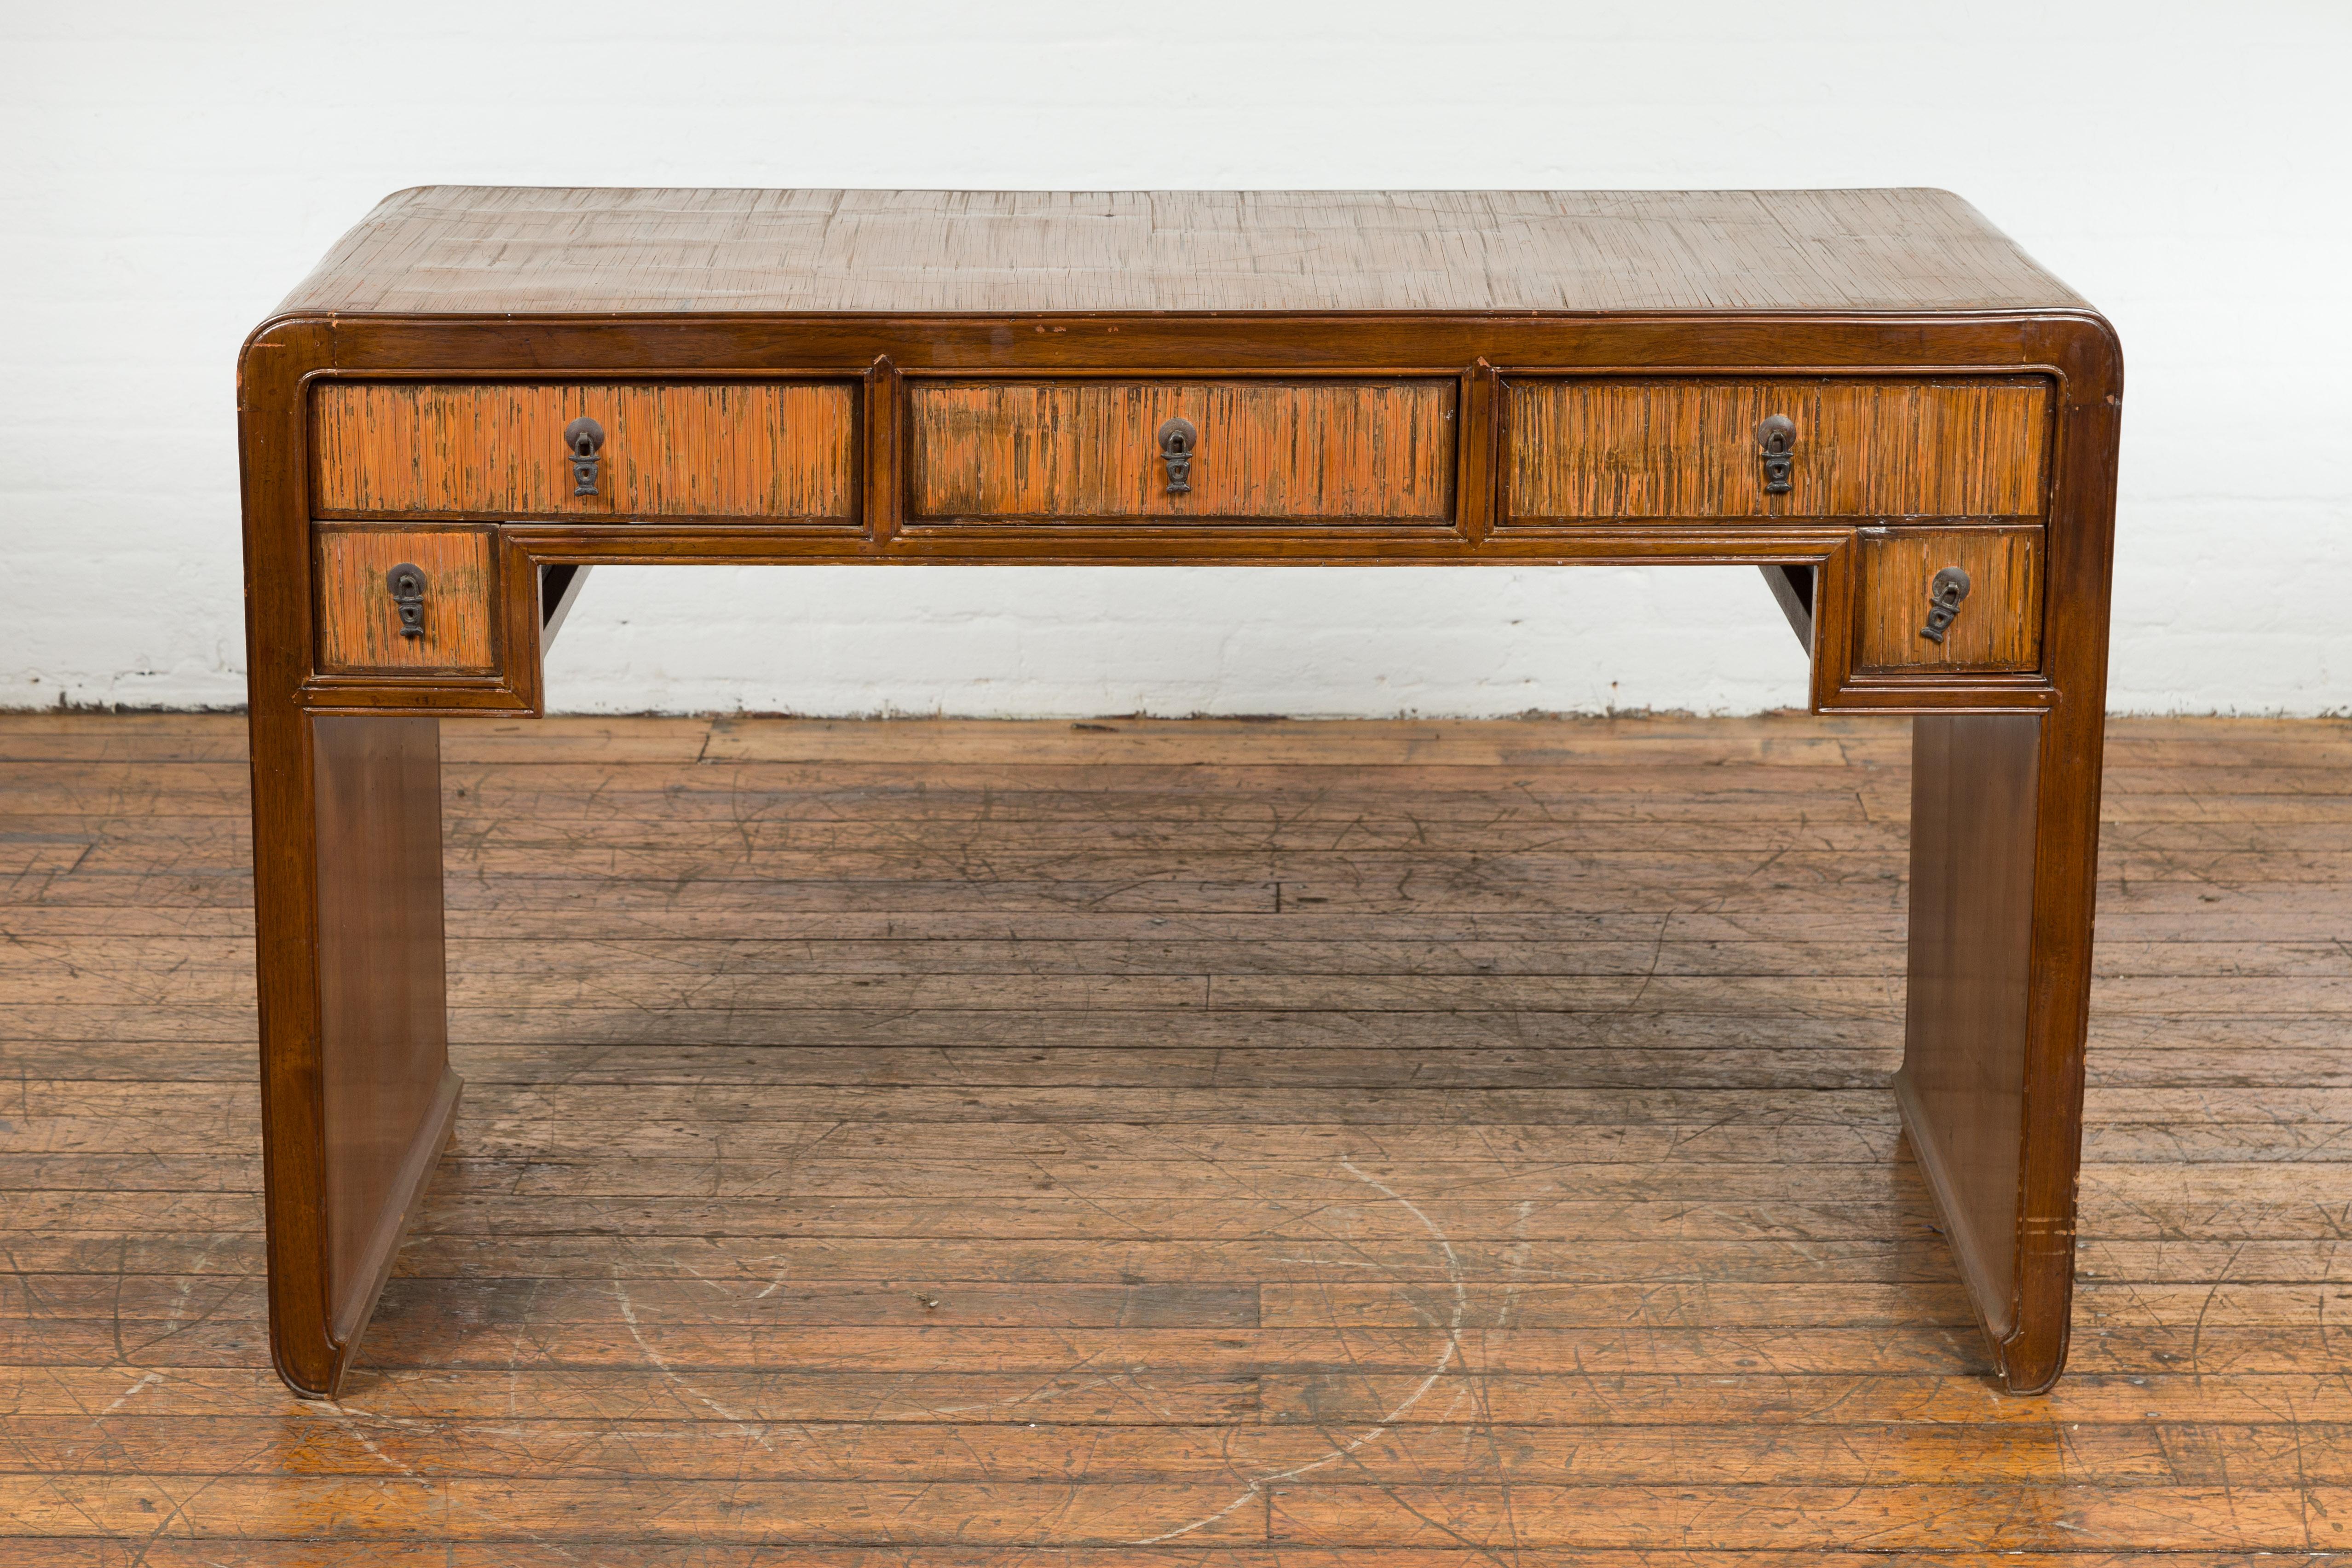 A vintage Chinese waterfall desk with five drawers, opium mat top and rustic character. Emanating a blend of exotic allure and sophisticated craftsmanship, this vintage Chinese opium mat desk is a captivating piece of functional artistry. Born in